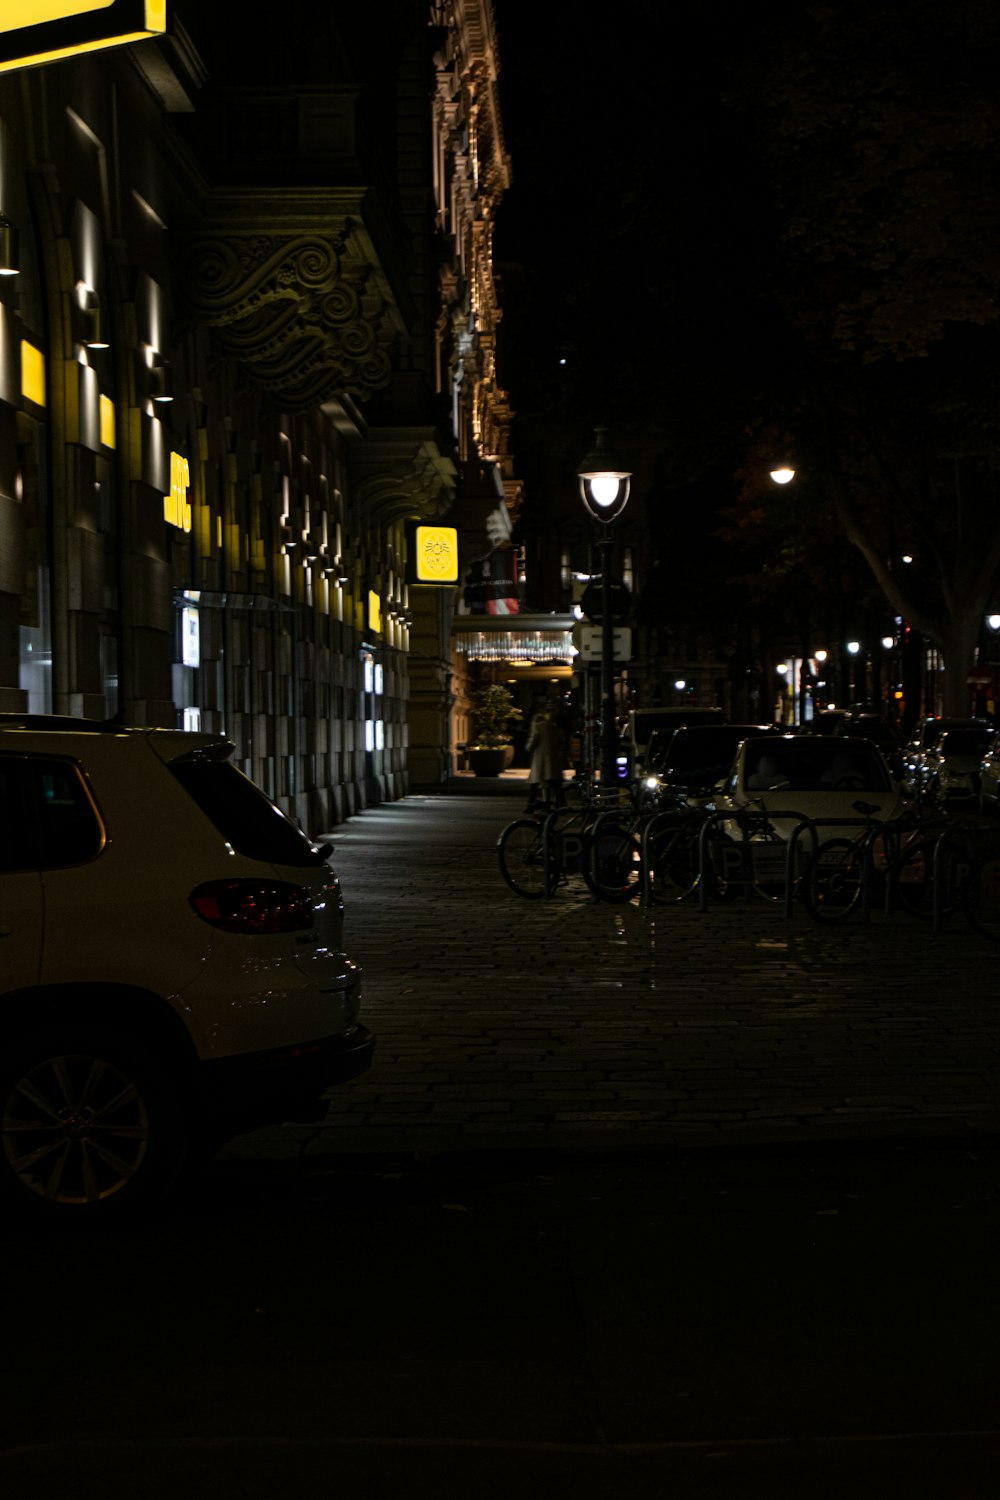 a car parked on the side of a street at night